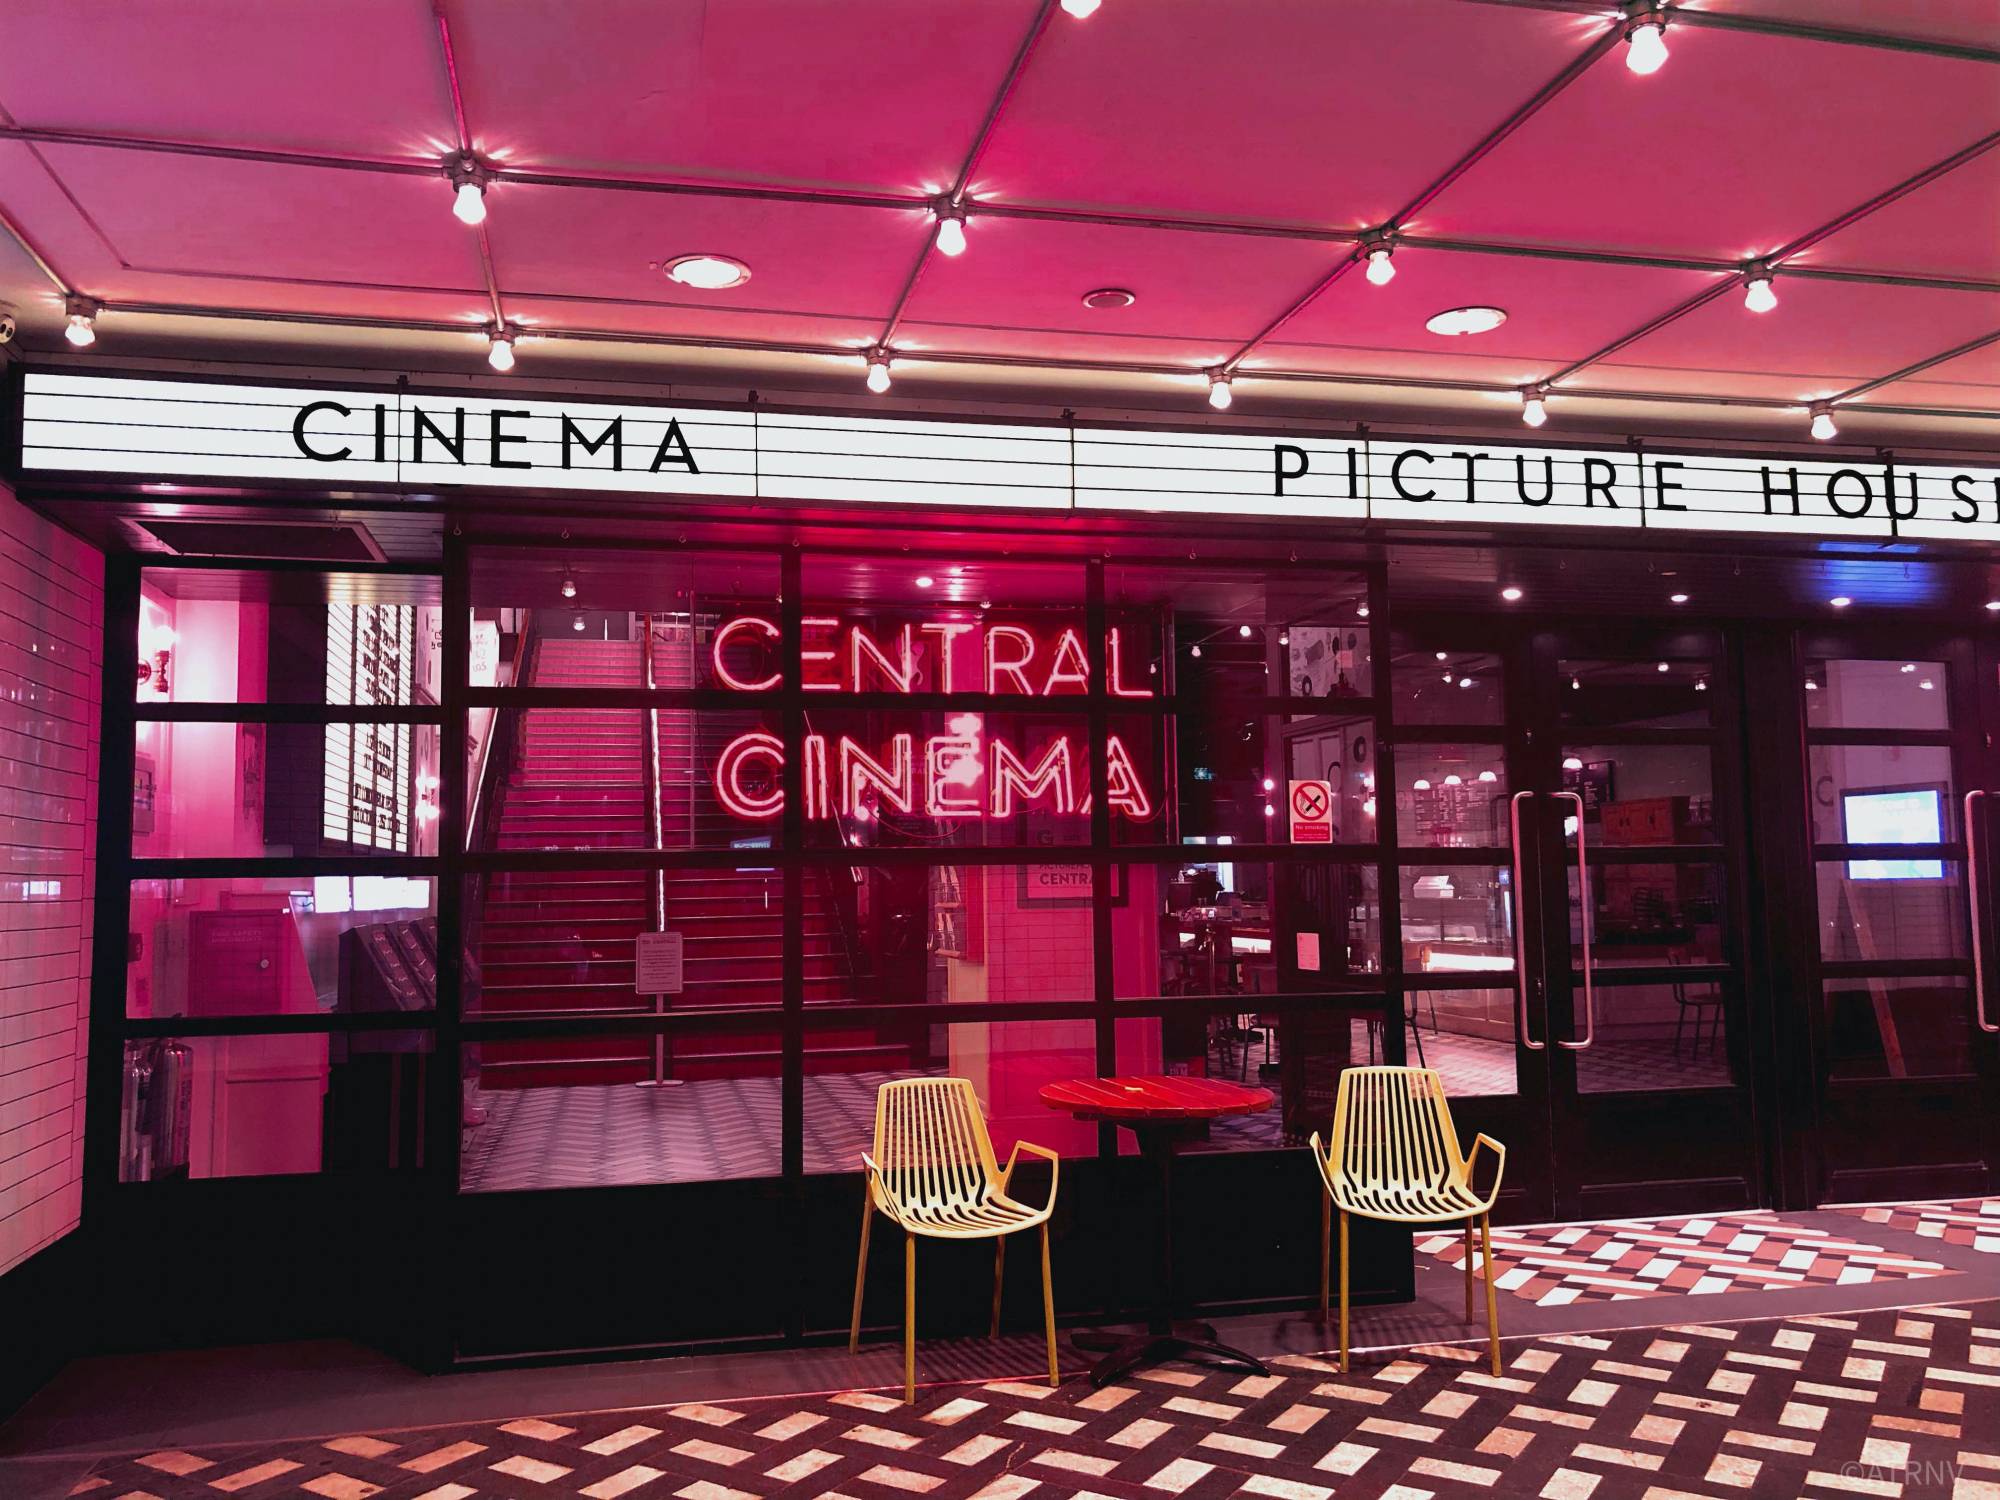 The front of a movie theater bathed in crimson light, as seen from the front doorway.